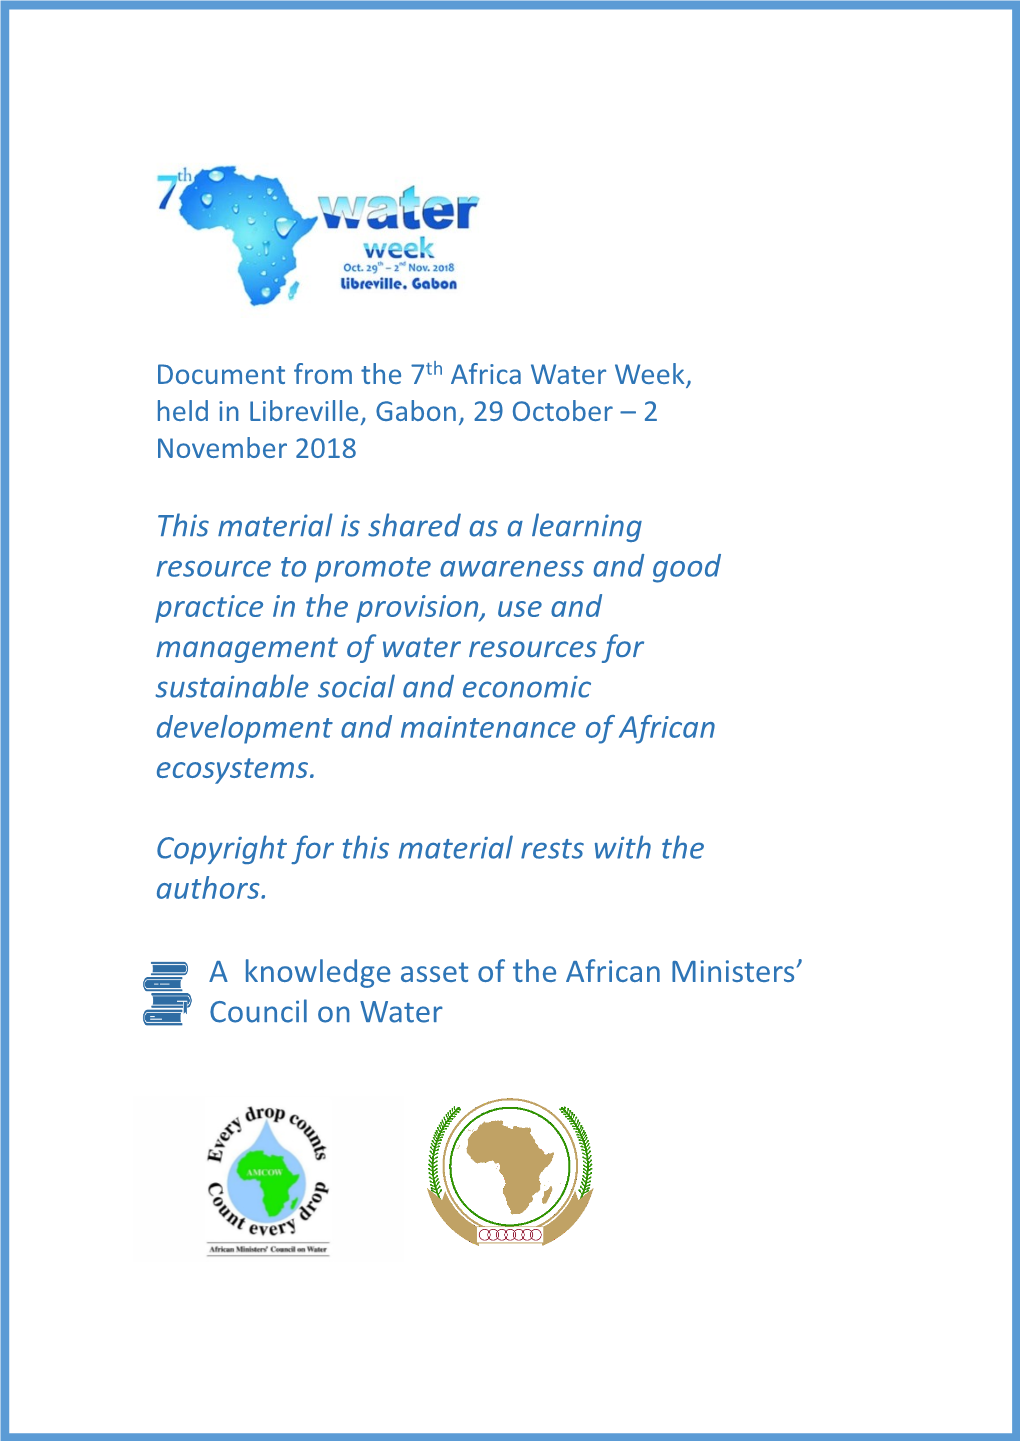 Country Focus Day Report , Africa Water Week 7, 31 October 2018